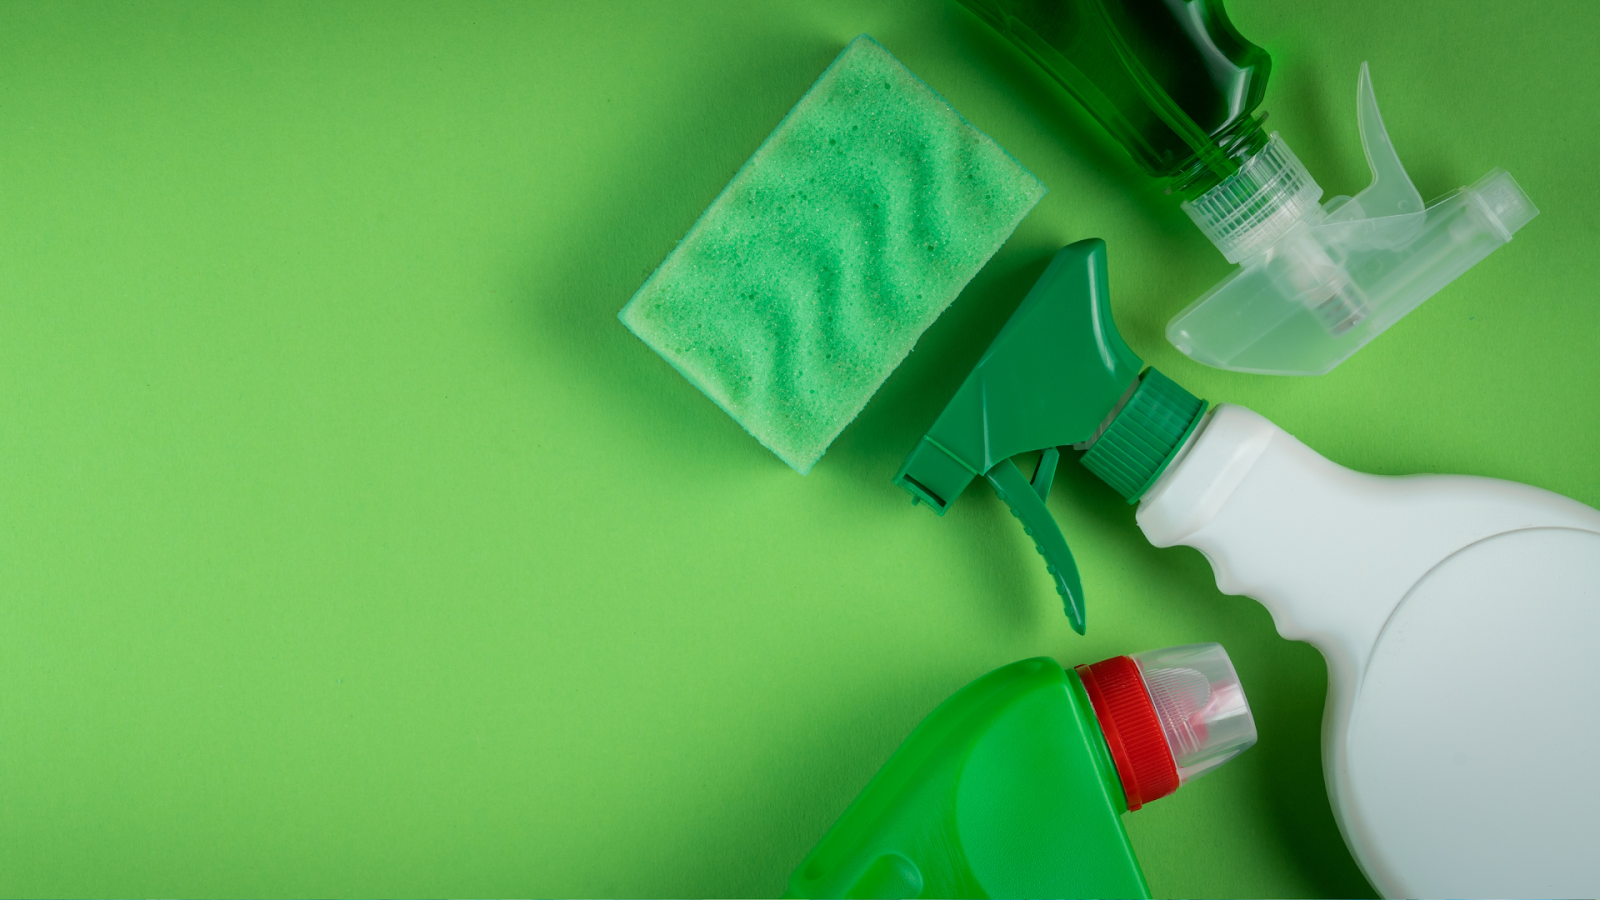 is it worth investing in green cleaning products?